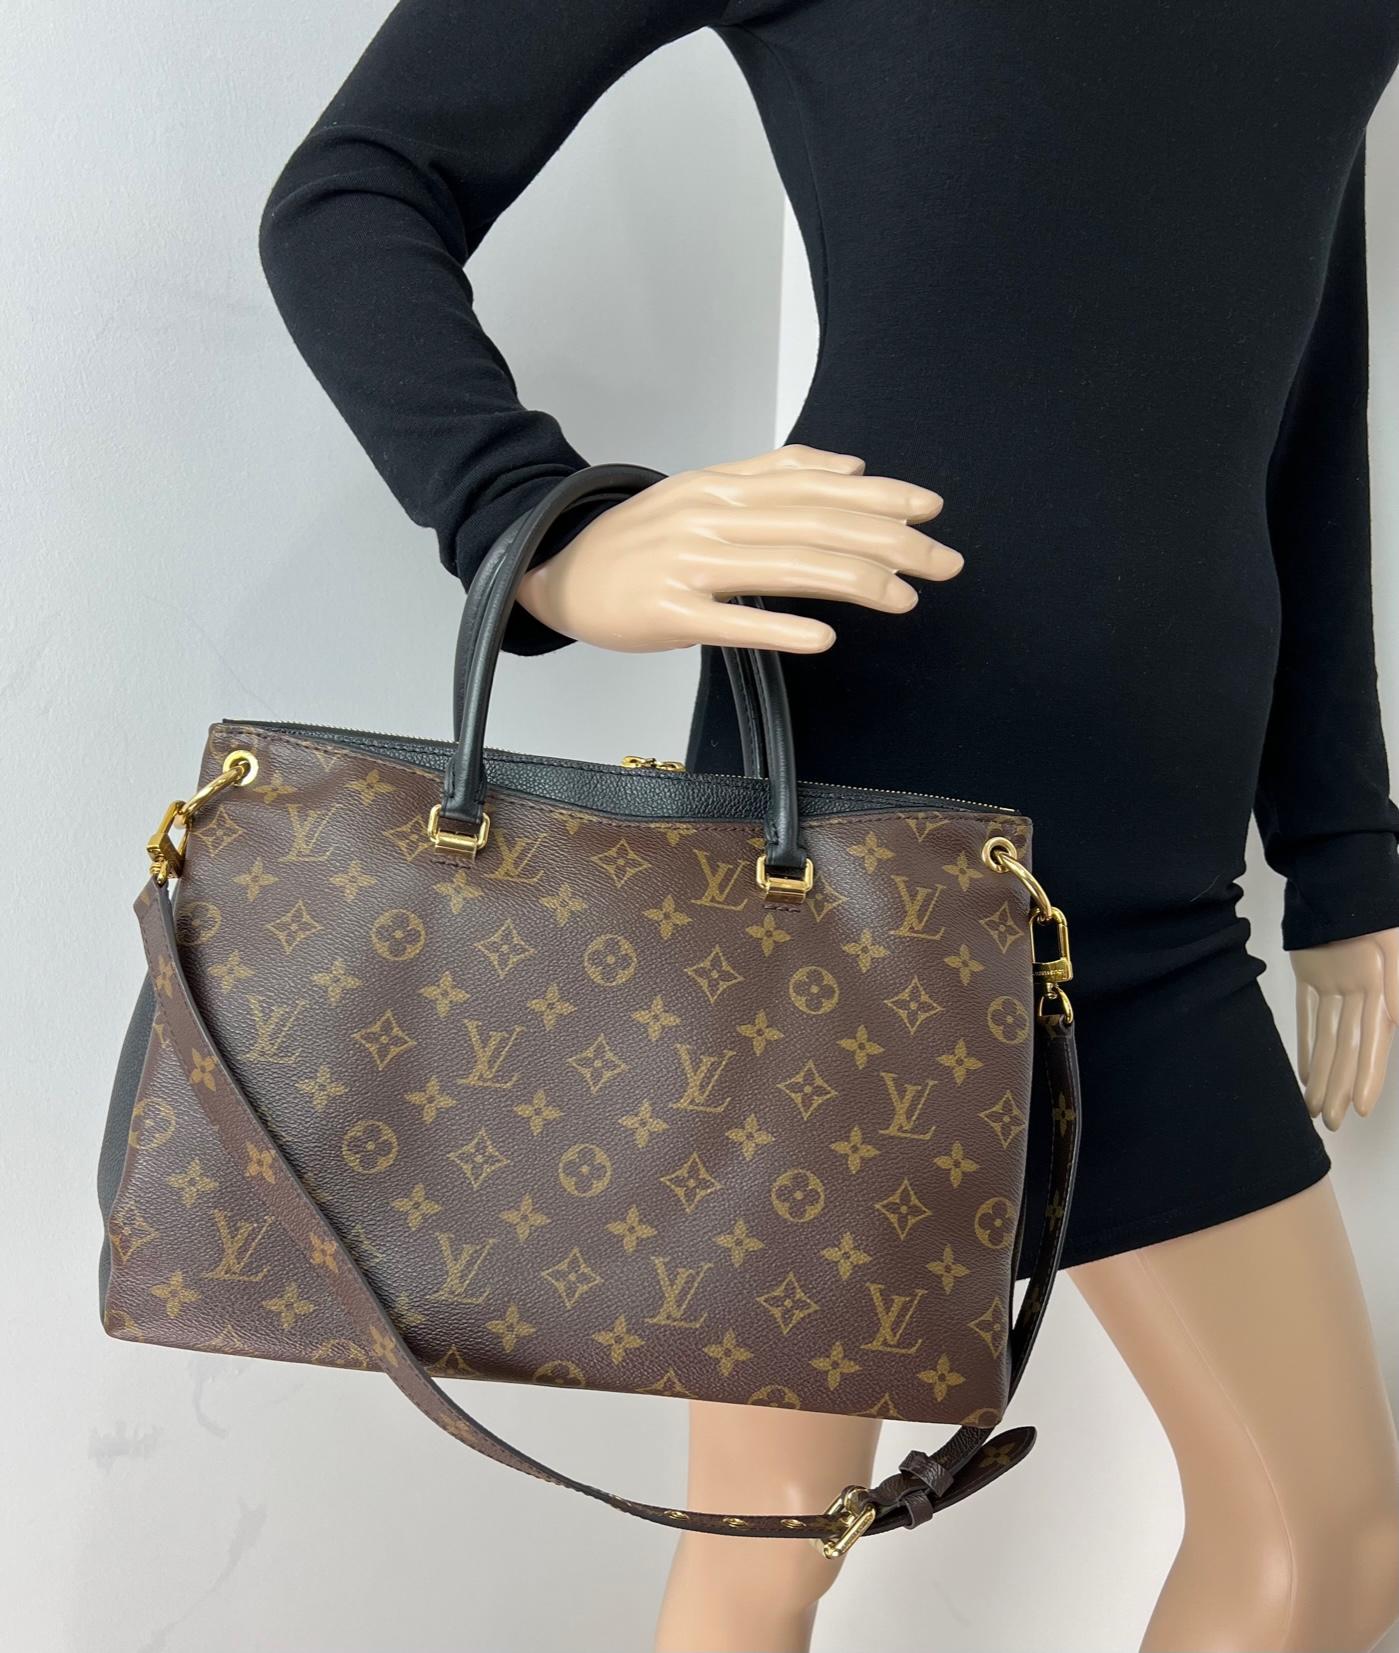 Pre-Owned  100% Authentic
Louis Vuitton Monogram Pallas MM Noir Leather
W/added Non LV Felt insert to help keep shape
and organize!
RATING: B  very good, well maintained,
shows minor signs of wear
MATERIAL: monogram canvas, leather
STRAP: LV